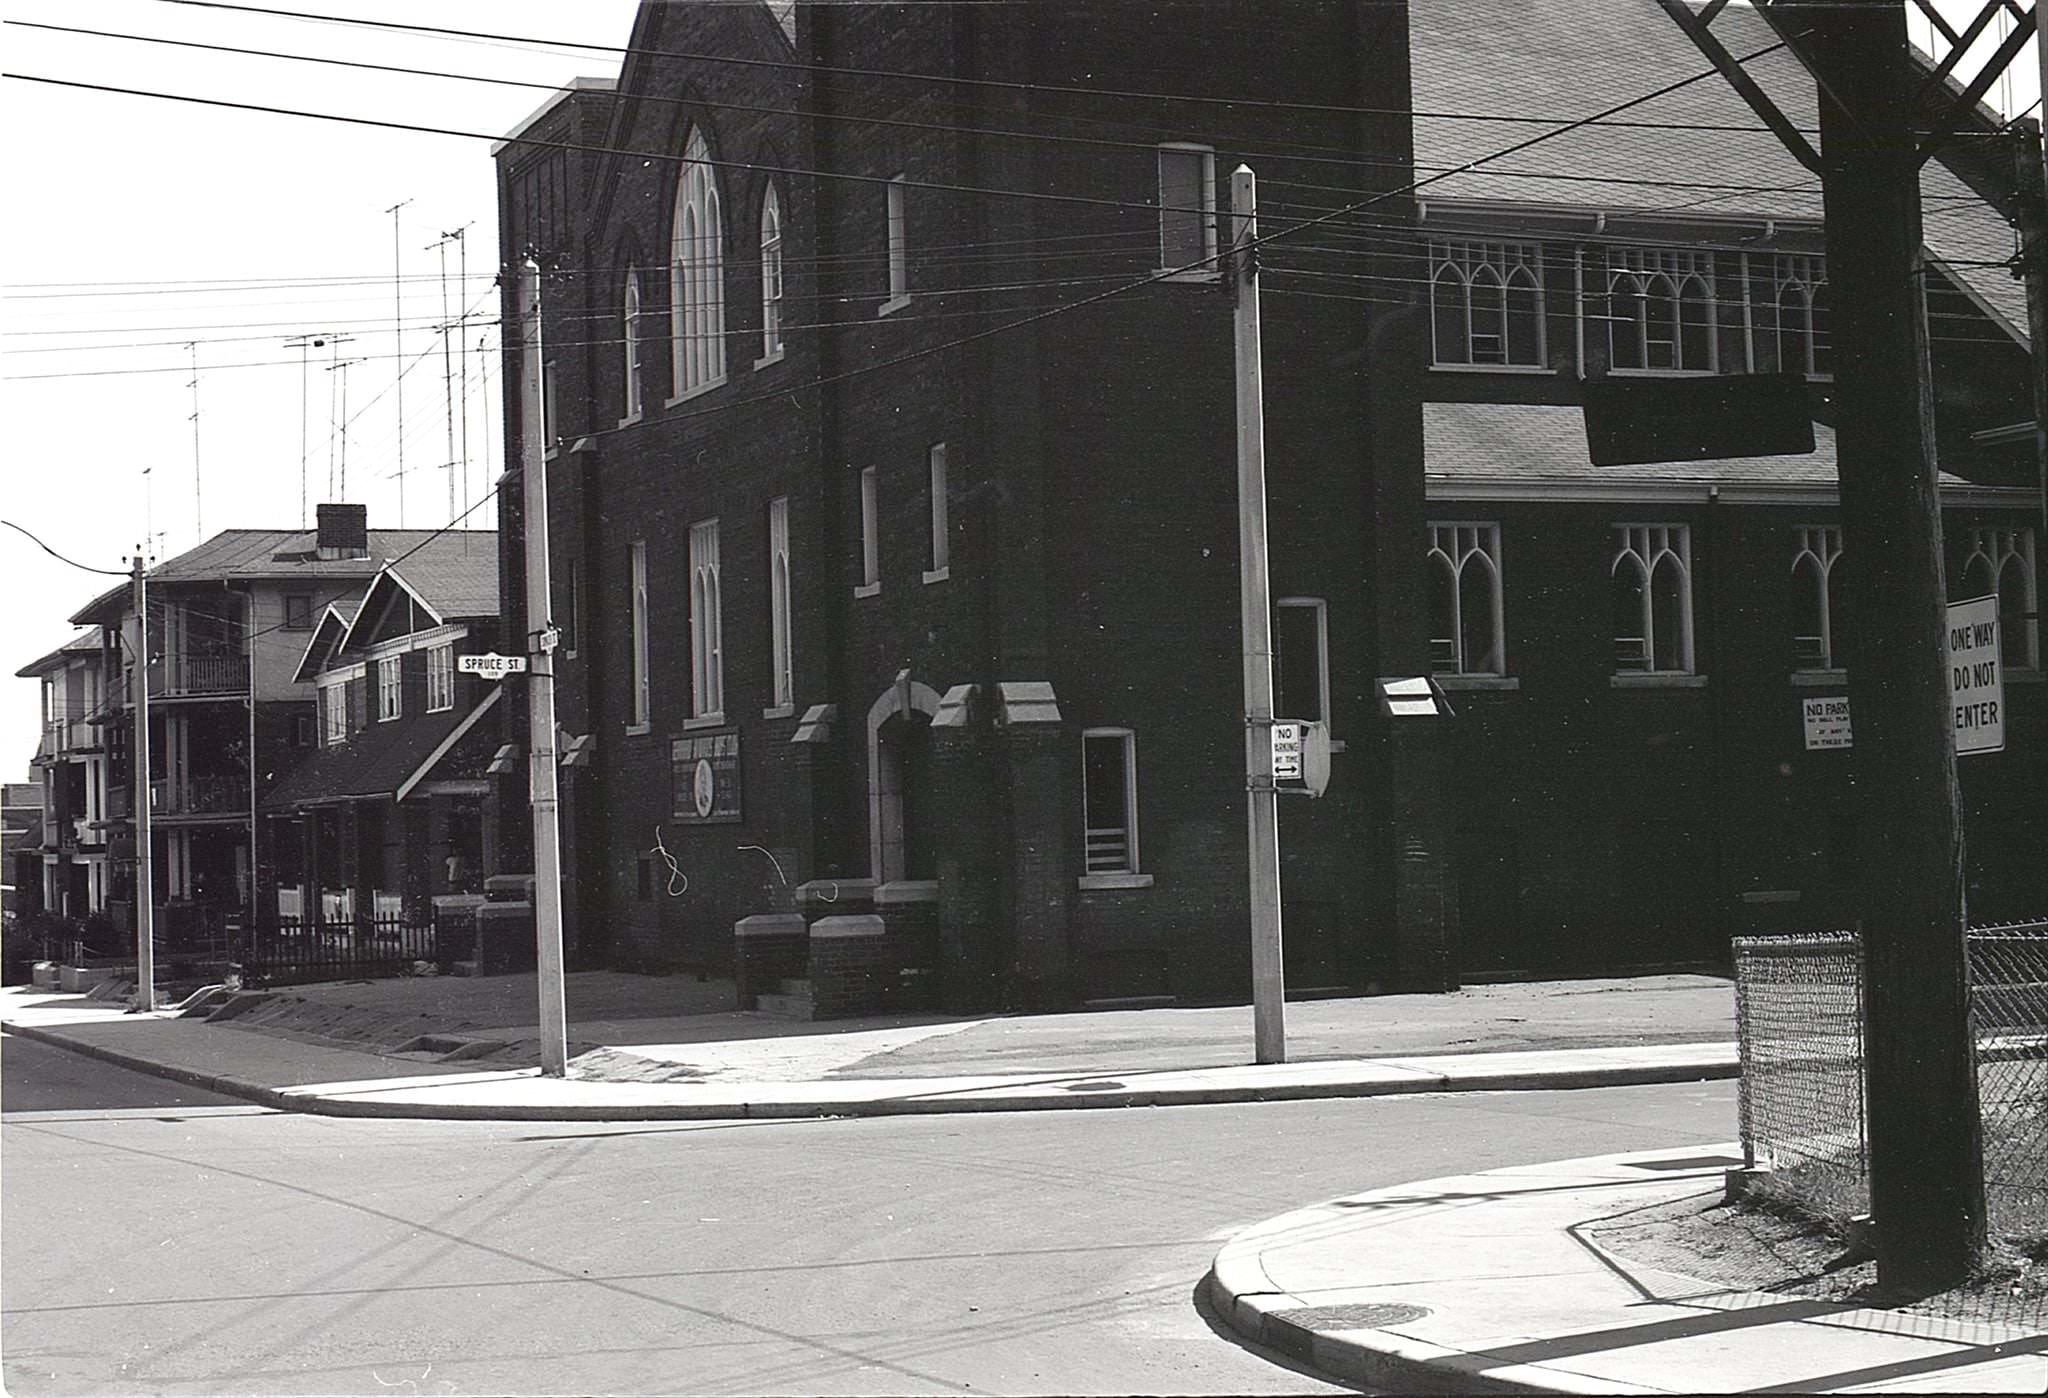 South west corner of Spruce and Sumach, 1963.